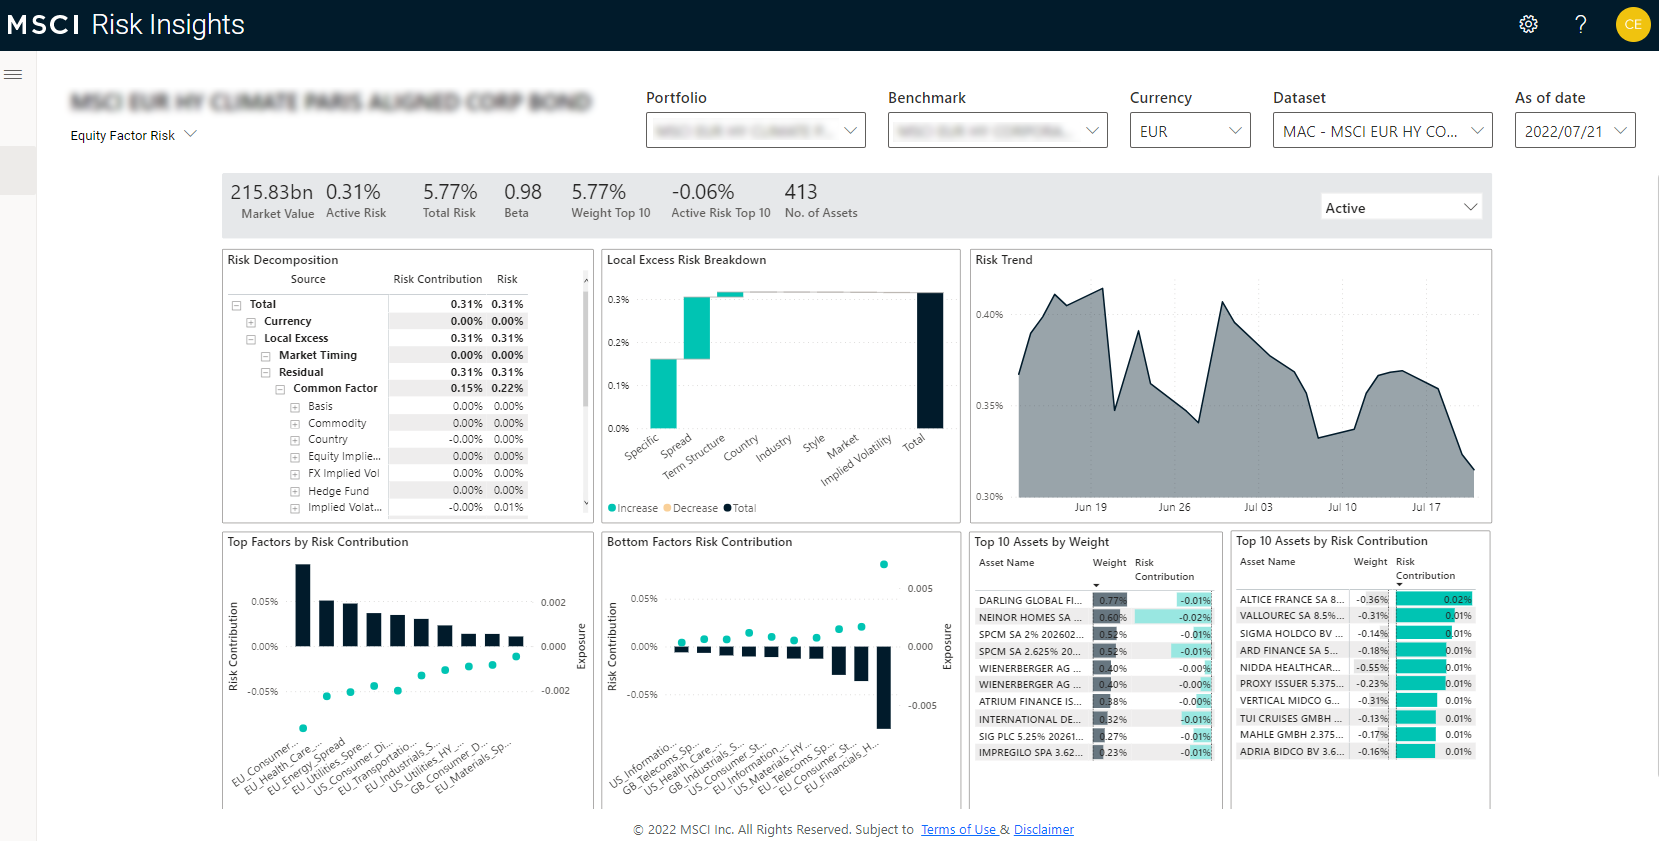 Risk Insights dashboards provide a curated view of key insights to help drive risk management decisions.